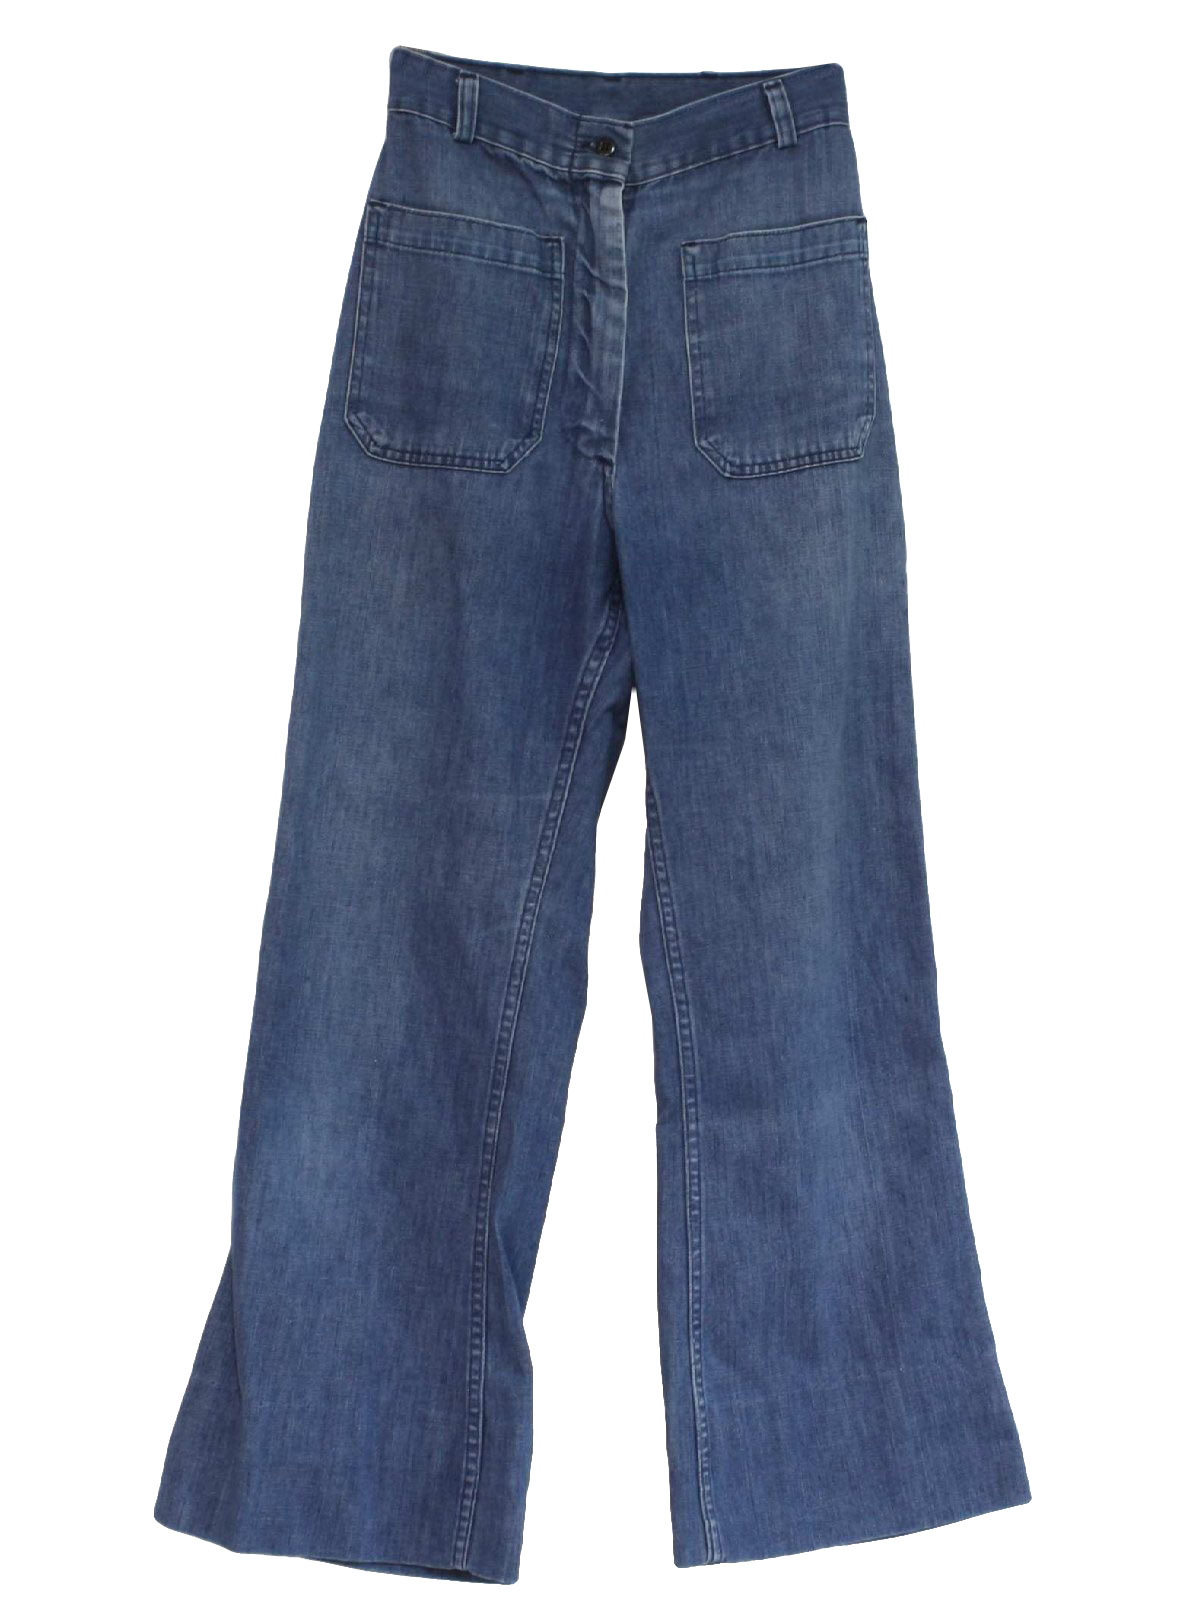 1970's Bellbottom Pants (Choctaw): 70s -Choctaw- Womens blue cotton and ...